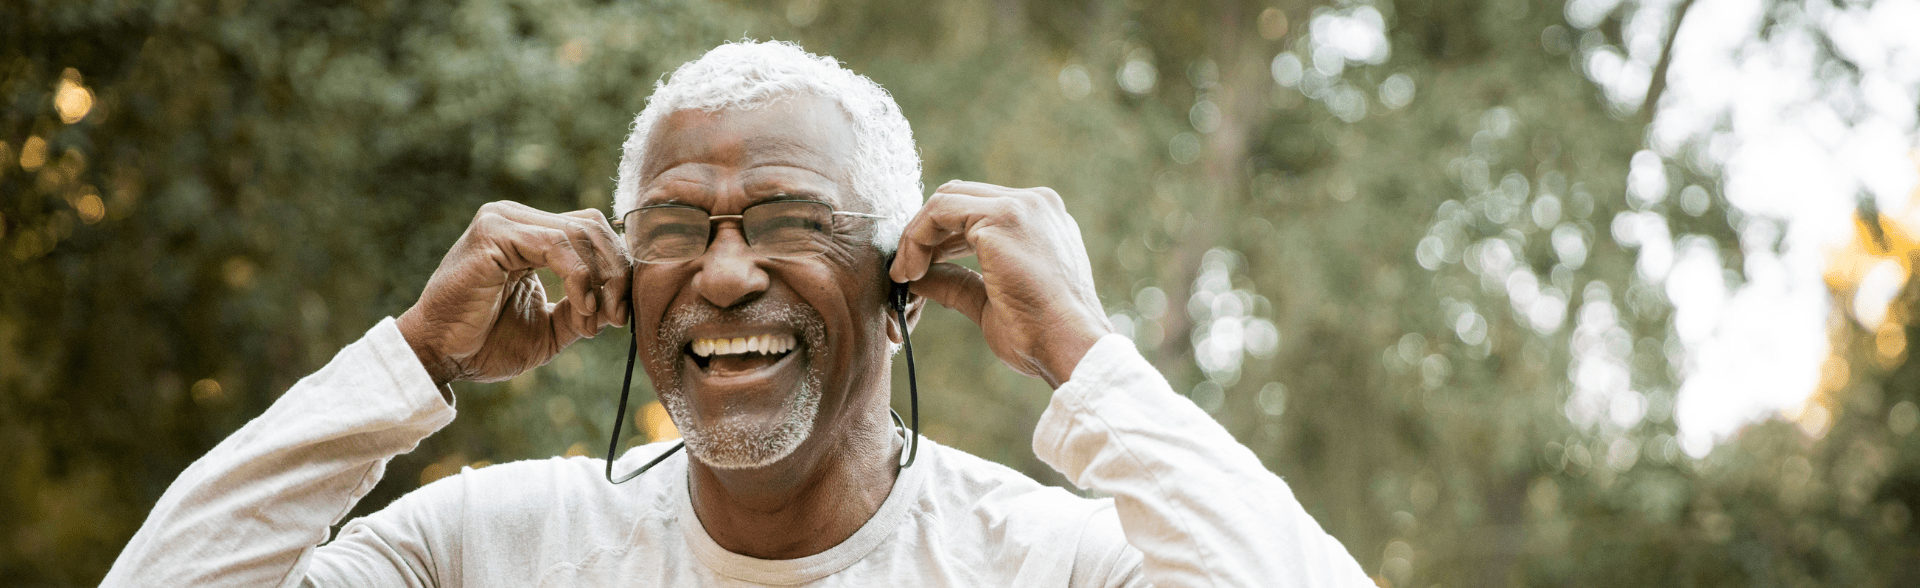 An older masc presenting person laughing. They are wearing glasses and a white long sleeved shirt.